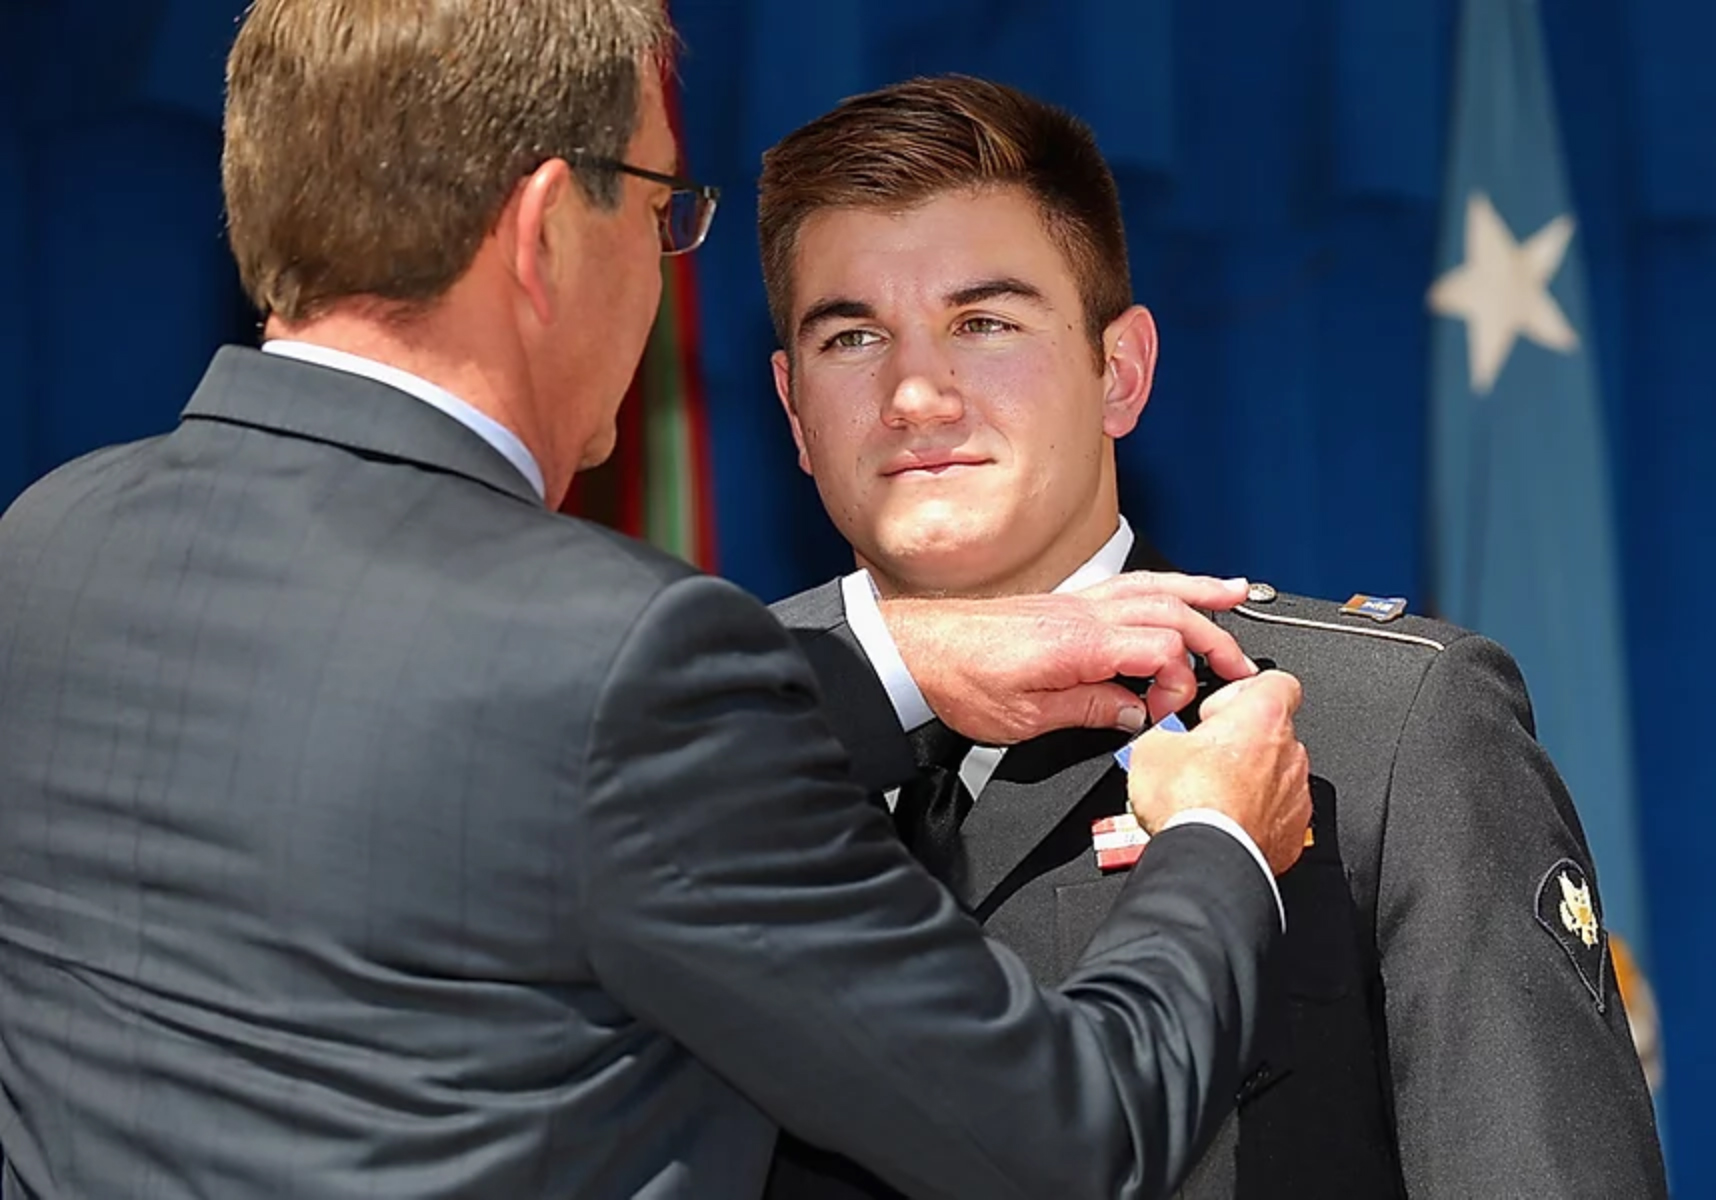 Alek Skarlatos receiving the Soldier's Medal, one of the US Army's highest awards, in 2015.